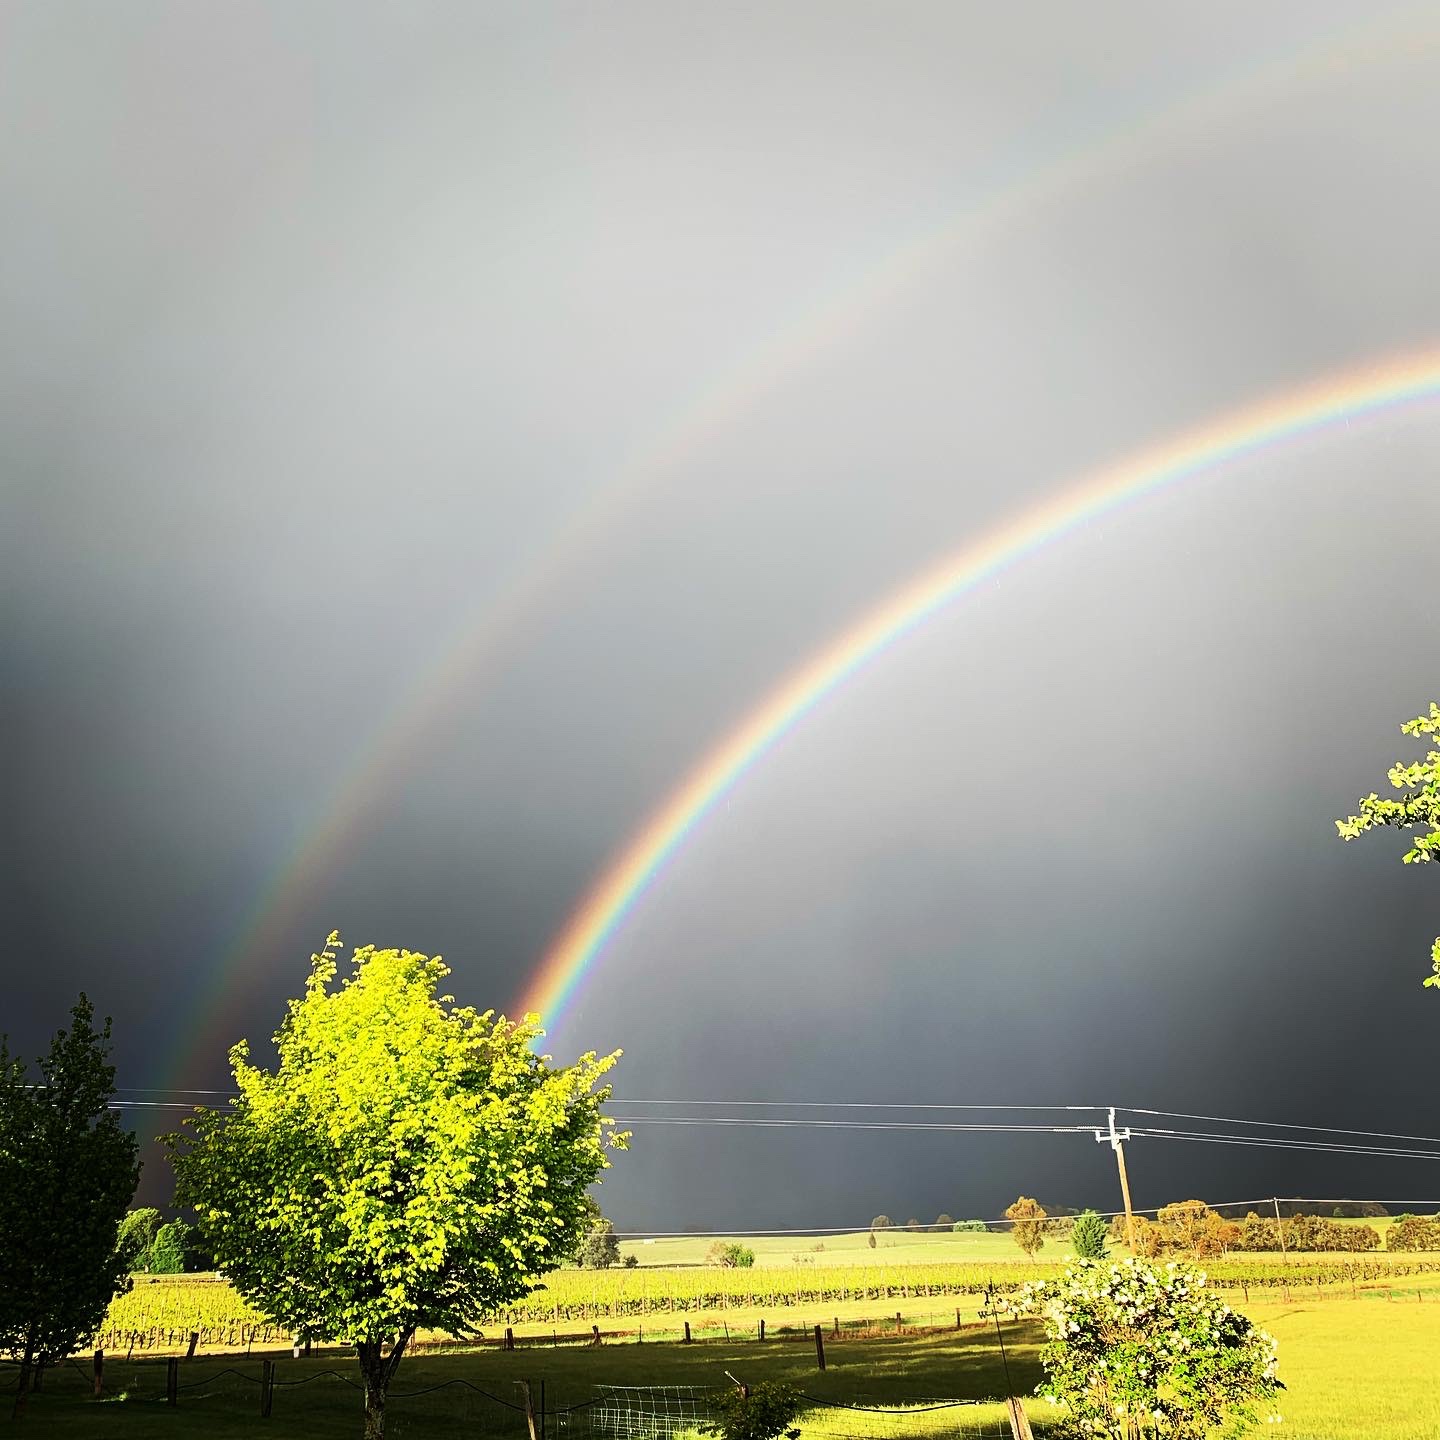 Double rainbow in a stormy sky